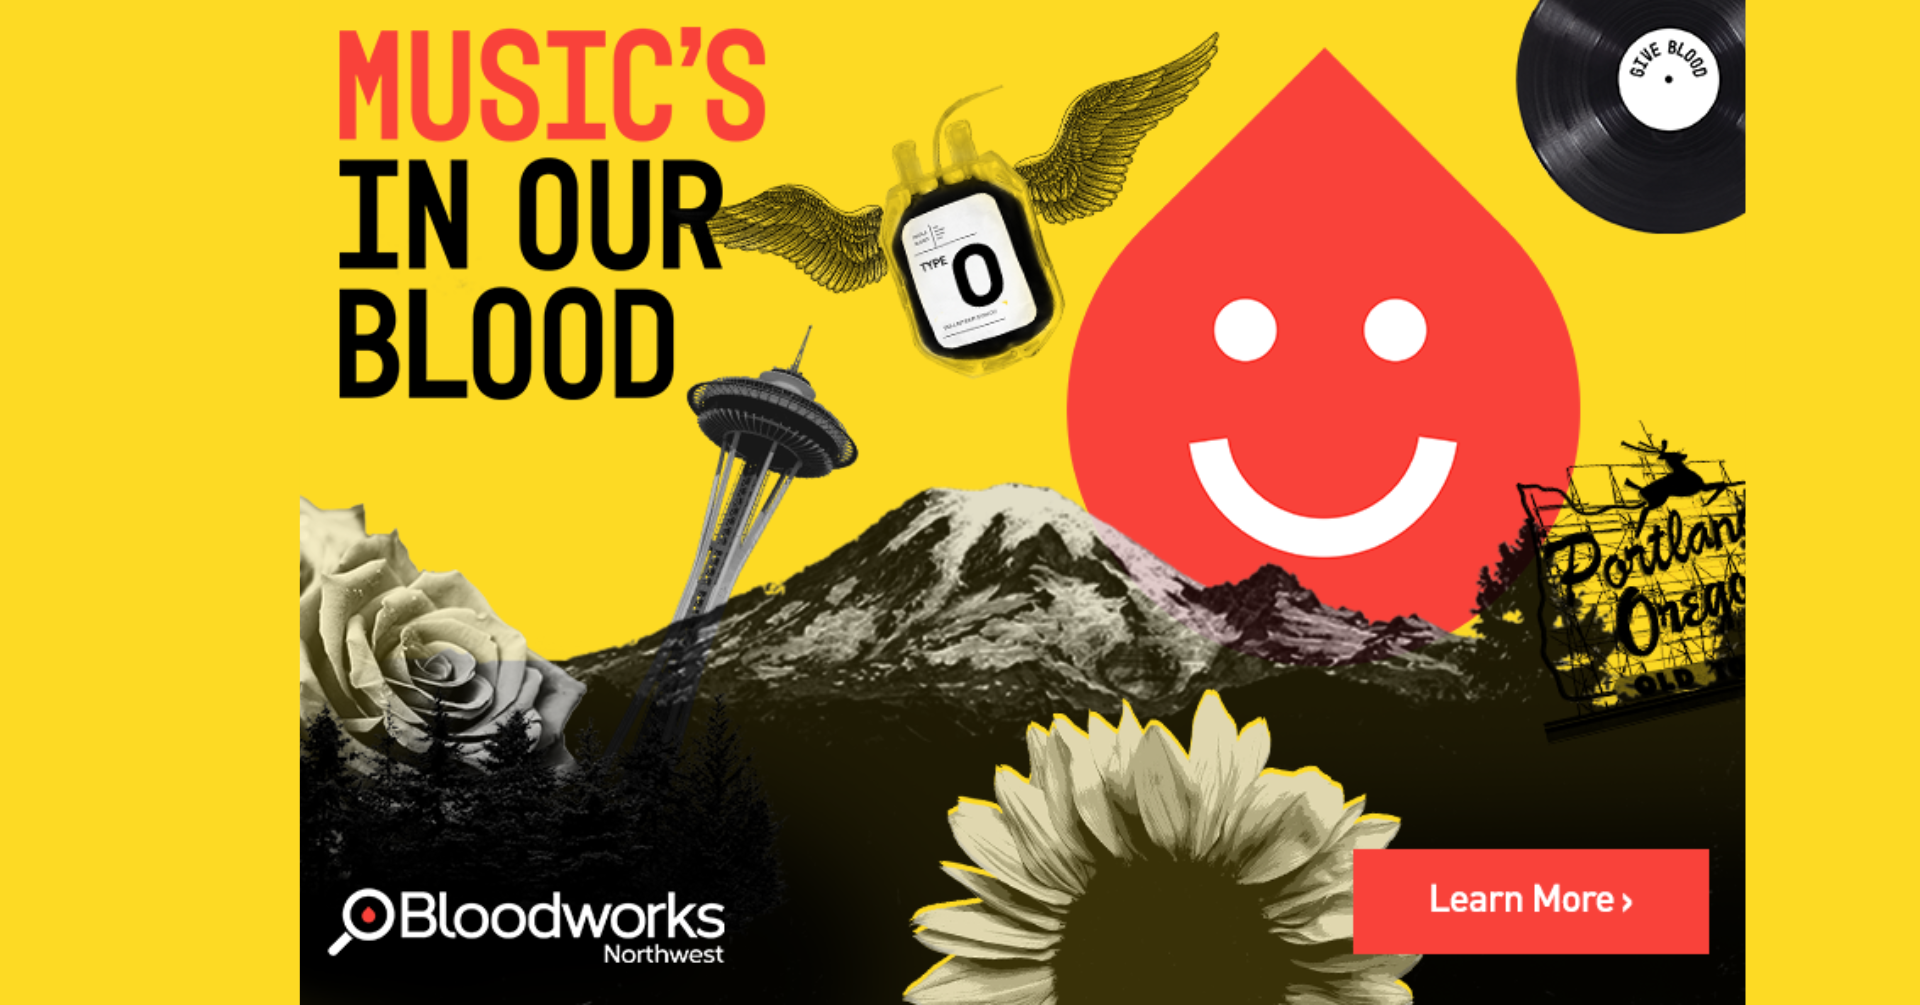 Promotional image for Bloodworks Northwest, featuring iconic symbols such as the Space Needle and Mount Rainier, with a slogan "Music's in our Blood" set against a vibrant yellow background, encouraging viewers to learn more about their campaign.